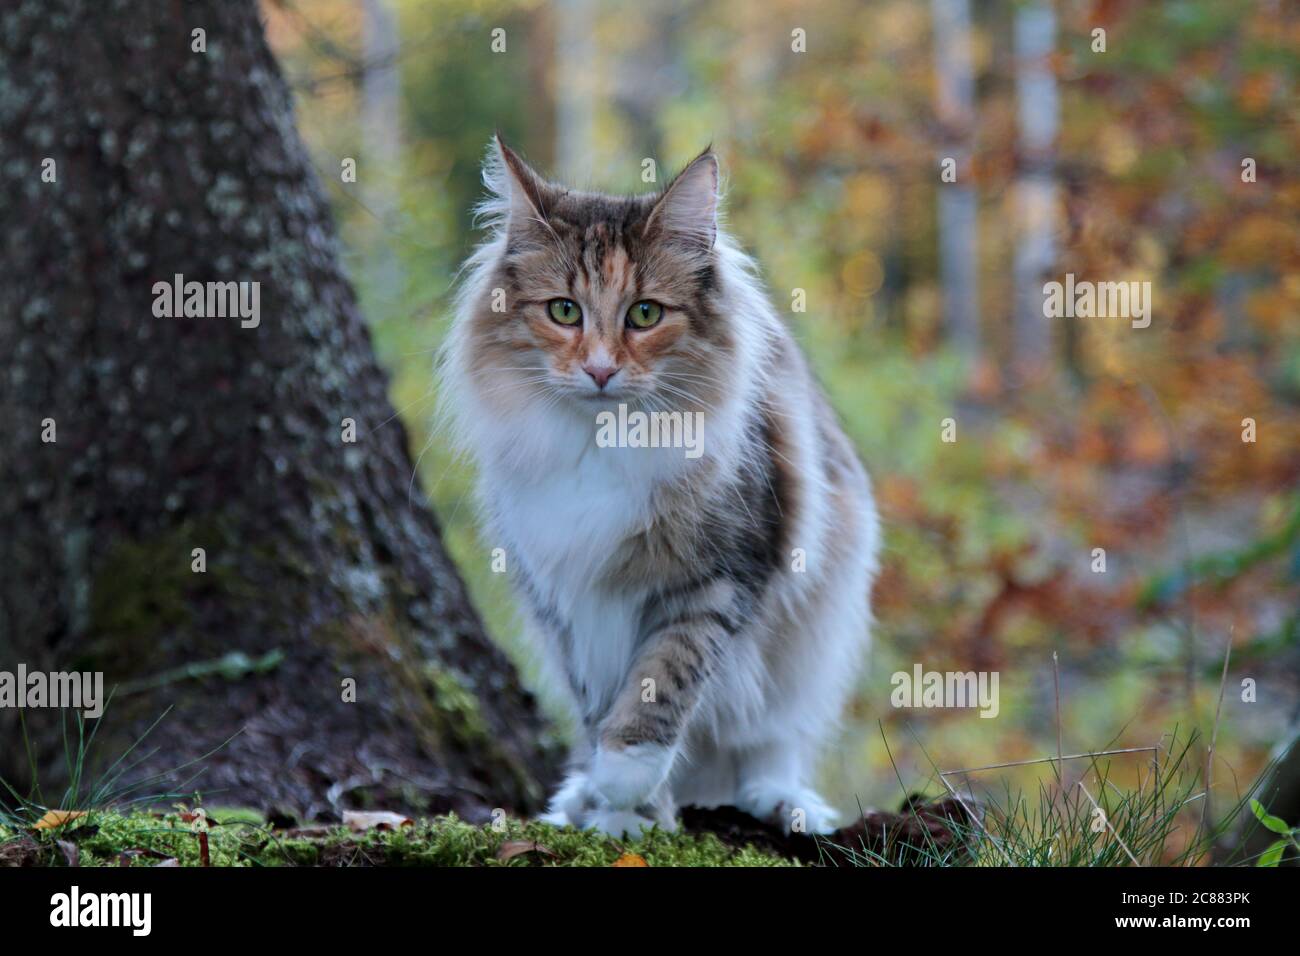 Beautiful Norwegian forest cat female staring at the photographer near a tree trunk in autumnal and colourful forest Stock Photo